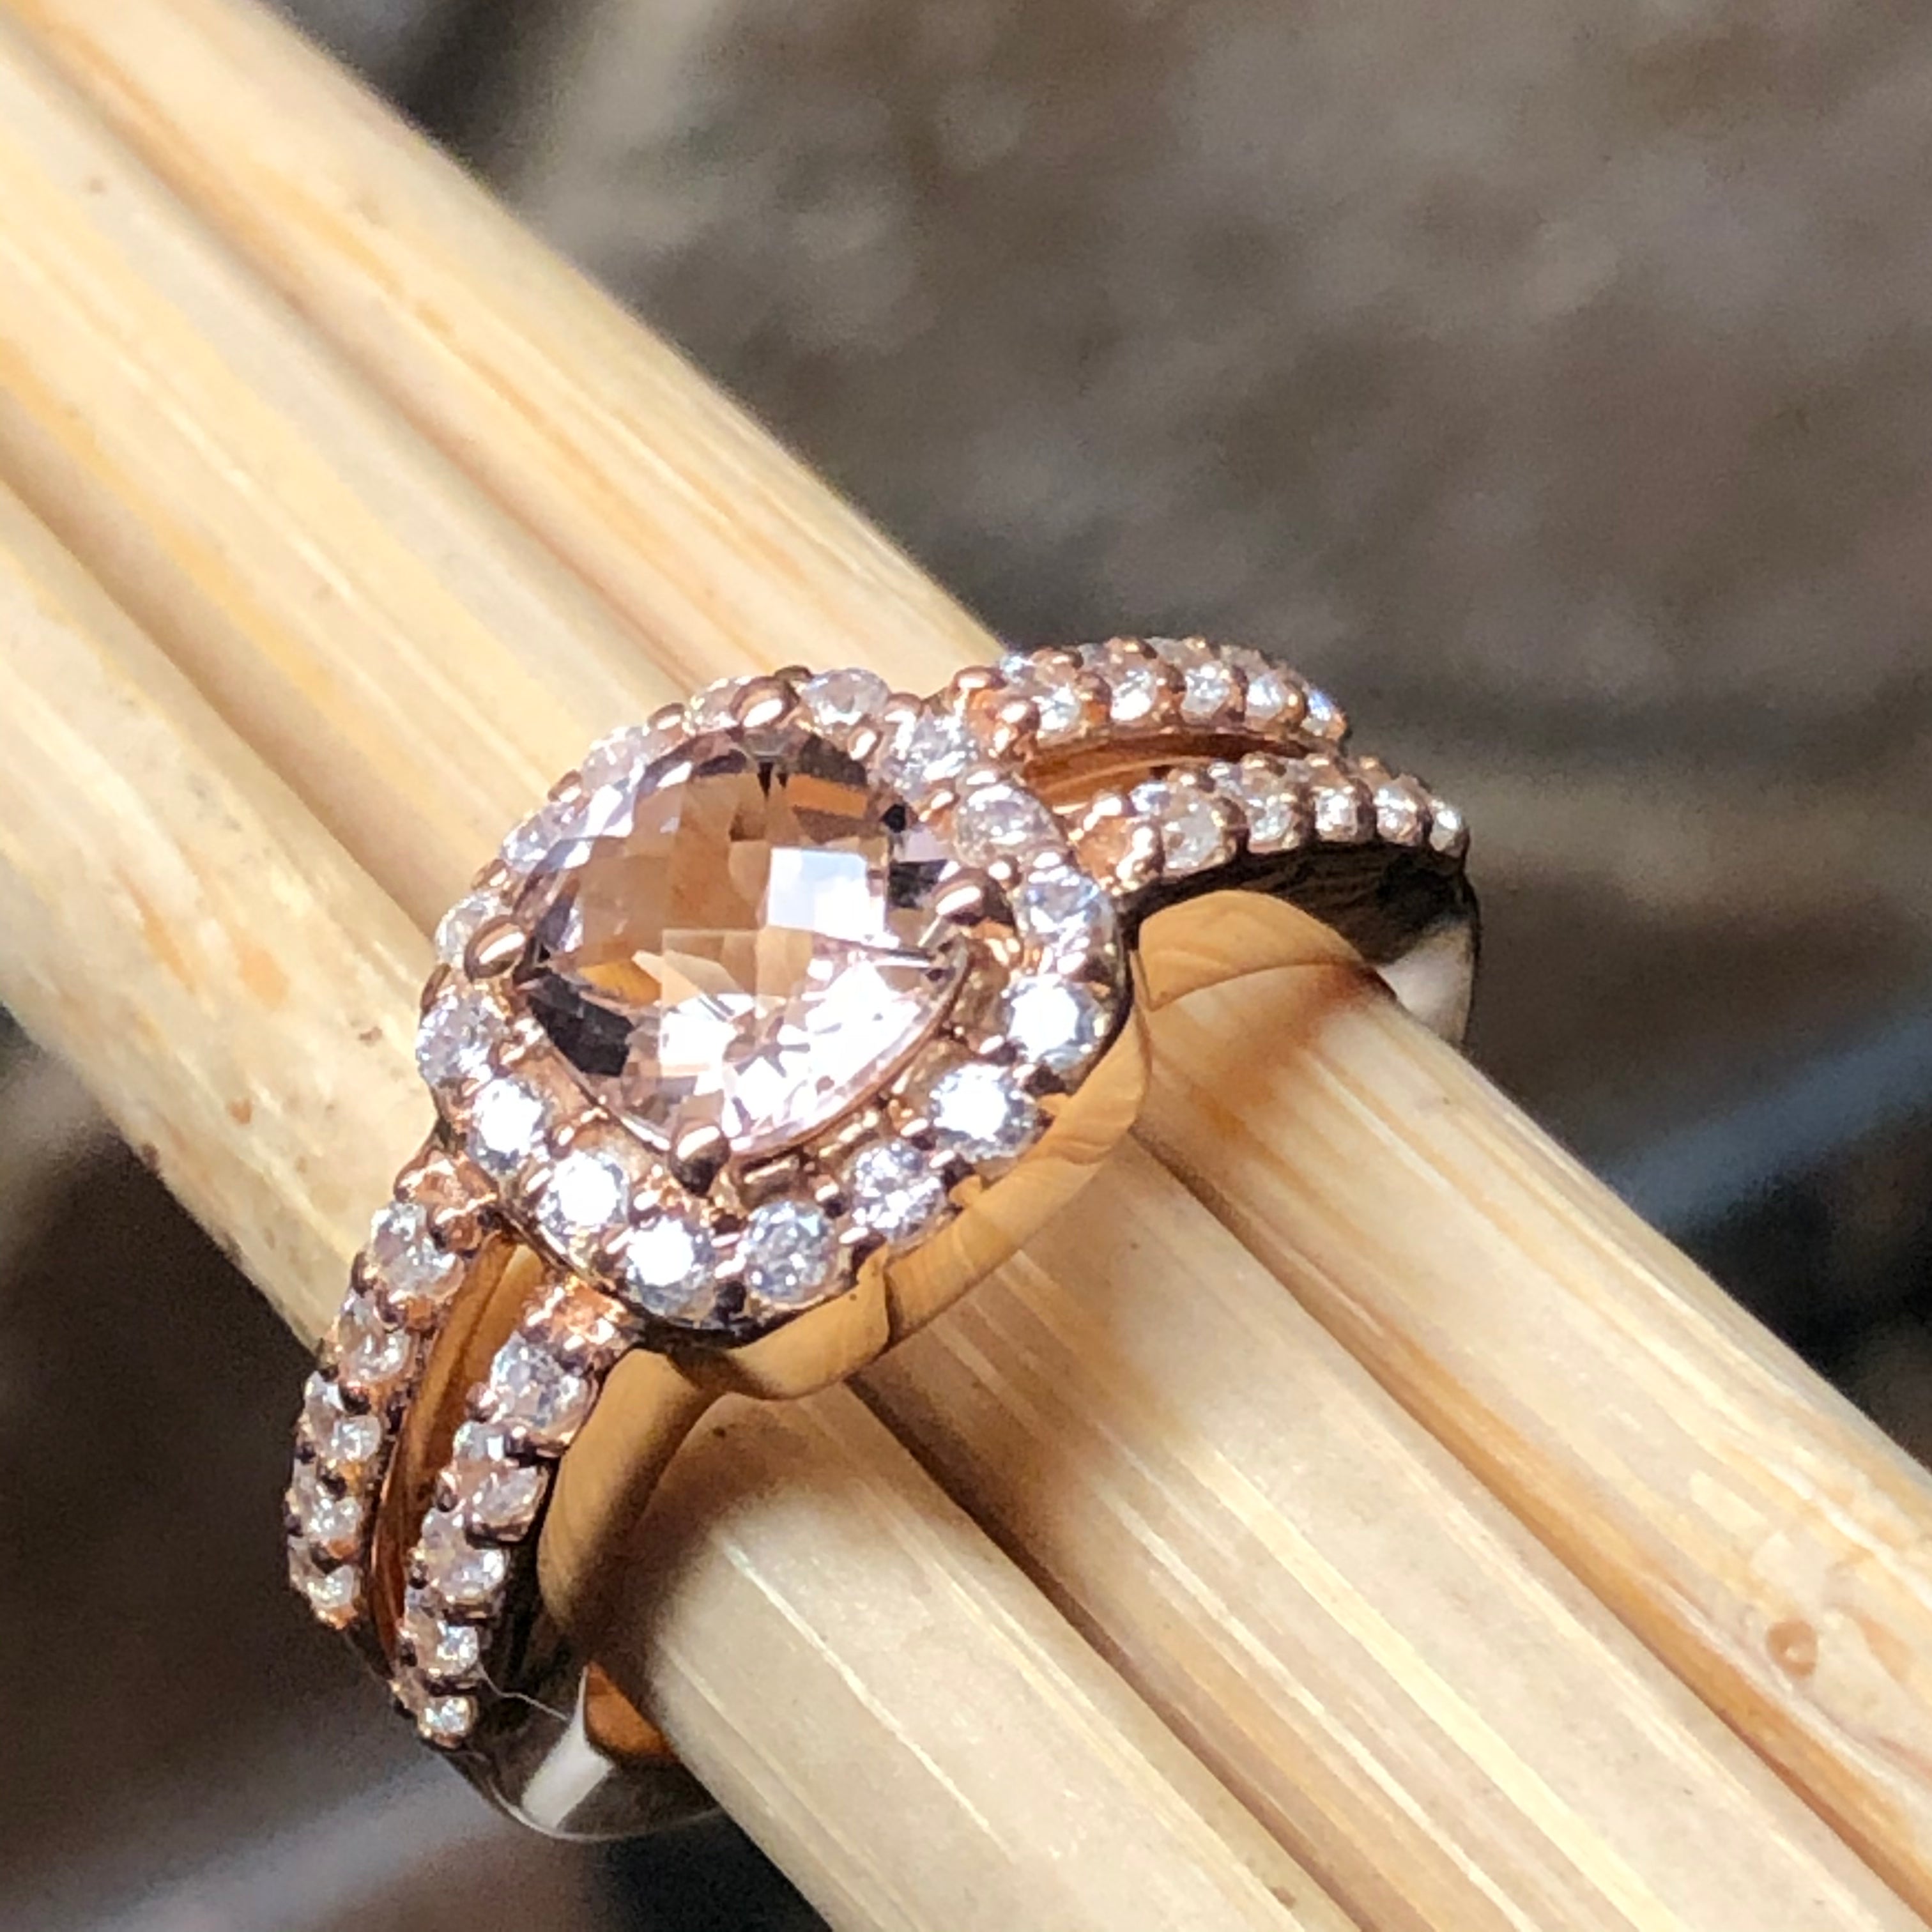 Natural 1.25ct Peach Morganite 14k Rose Gold Over Sterling Silver Engagement Ring Size 6, 7, 8, 9 - Natural Rocks by Kala